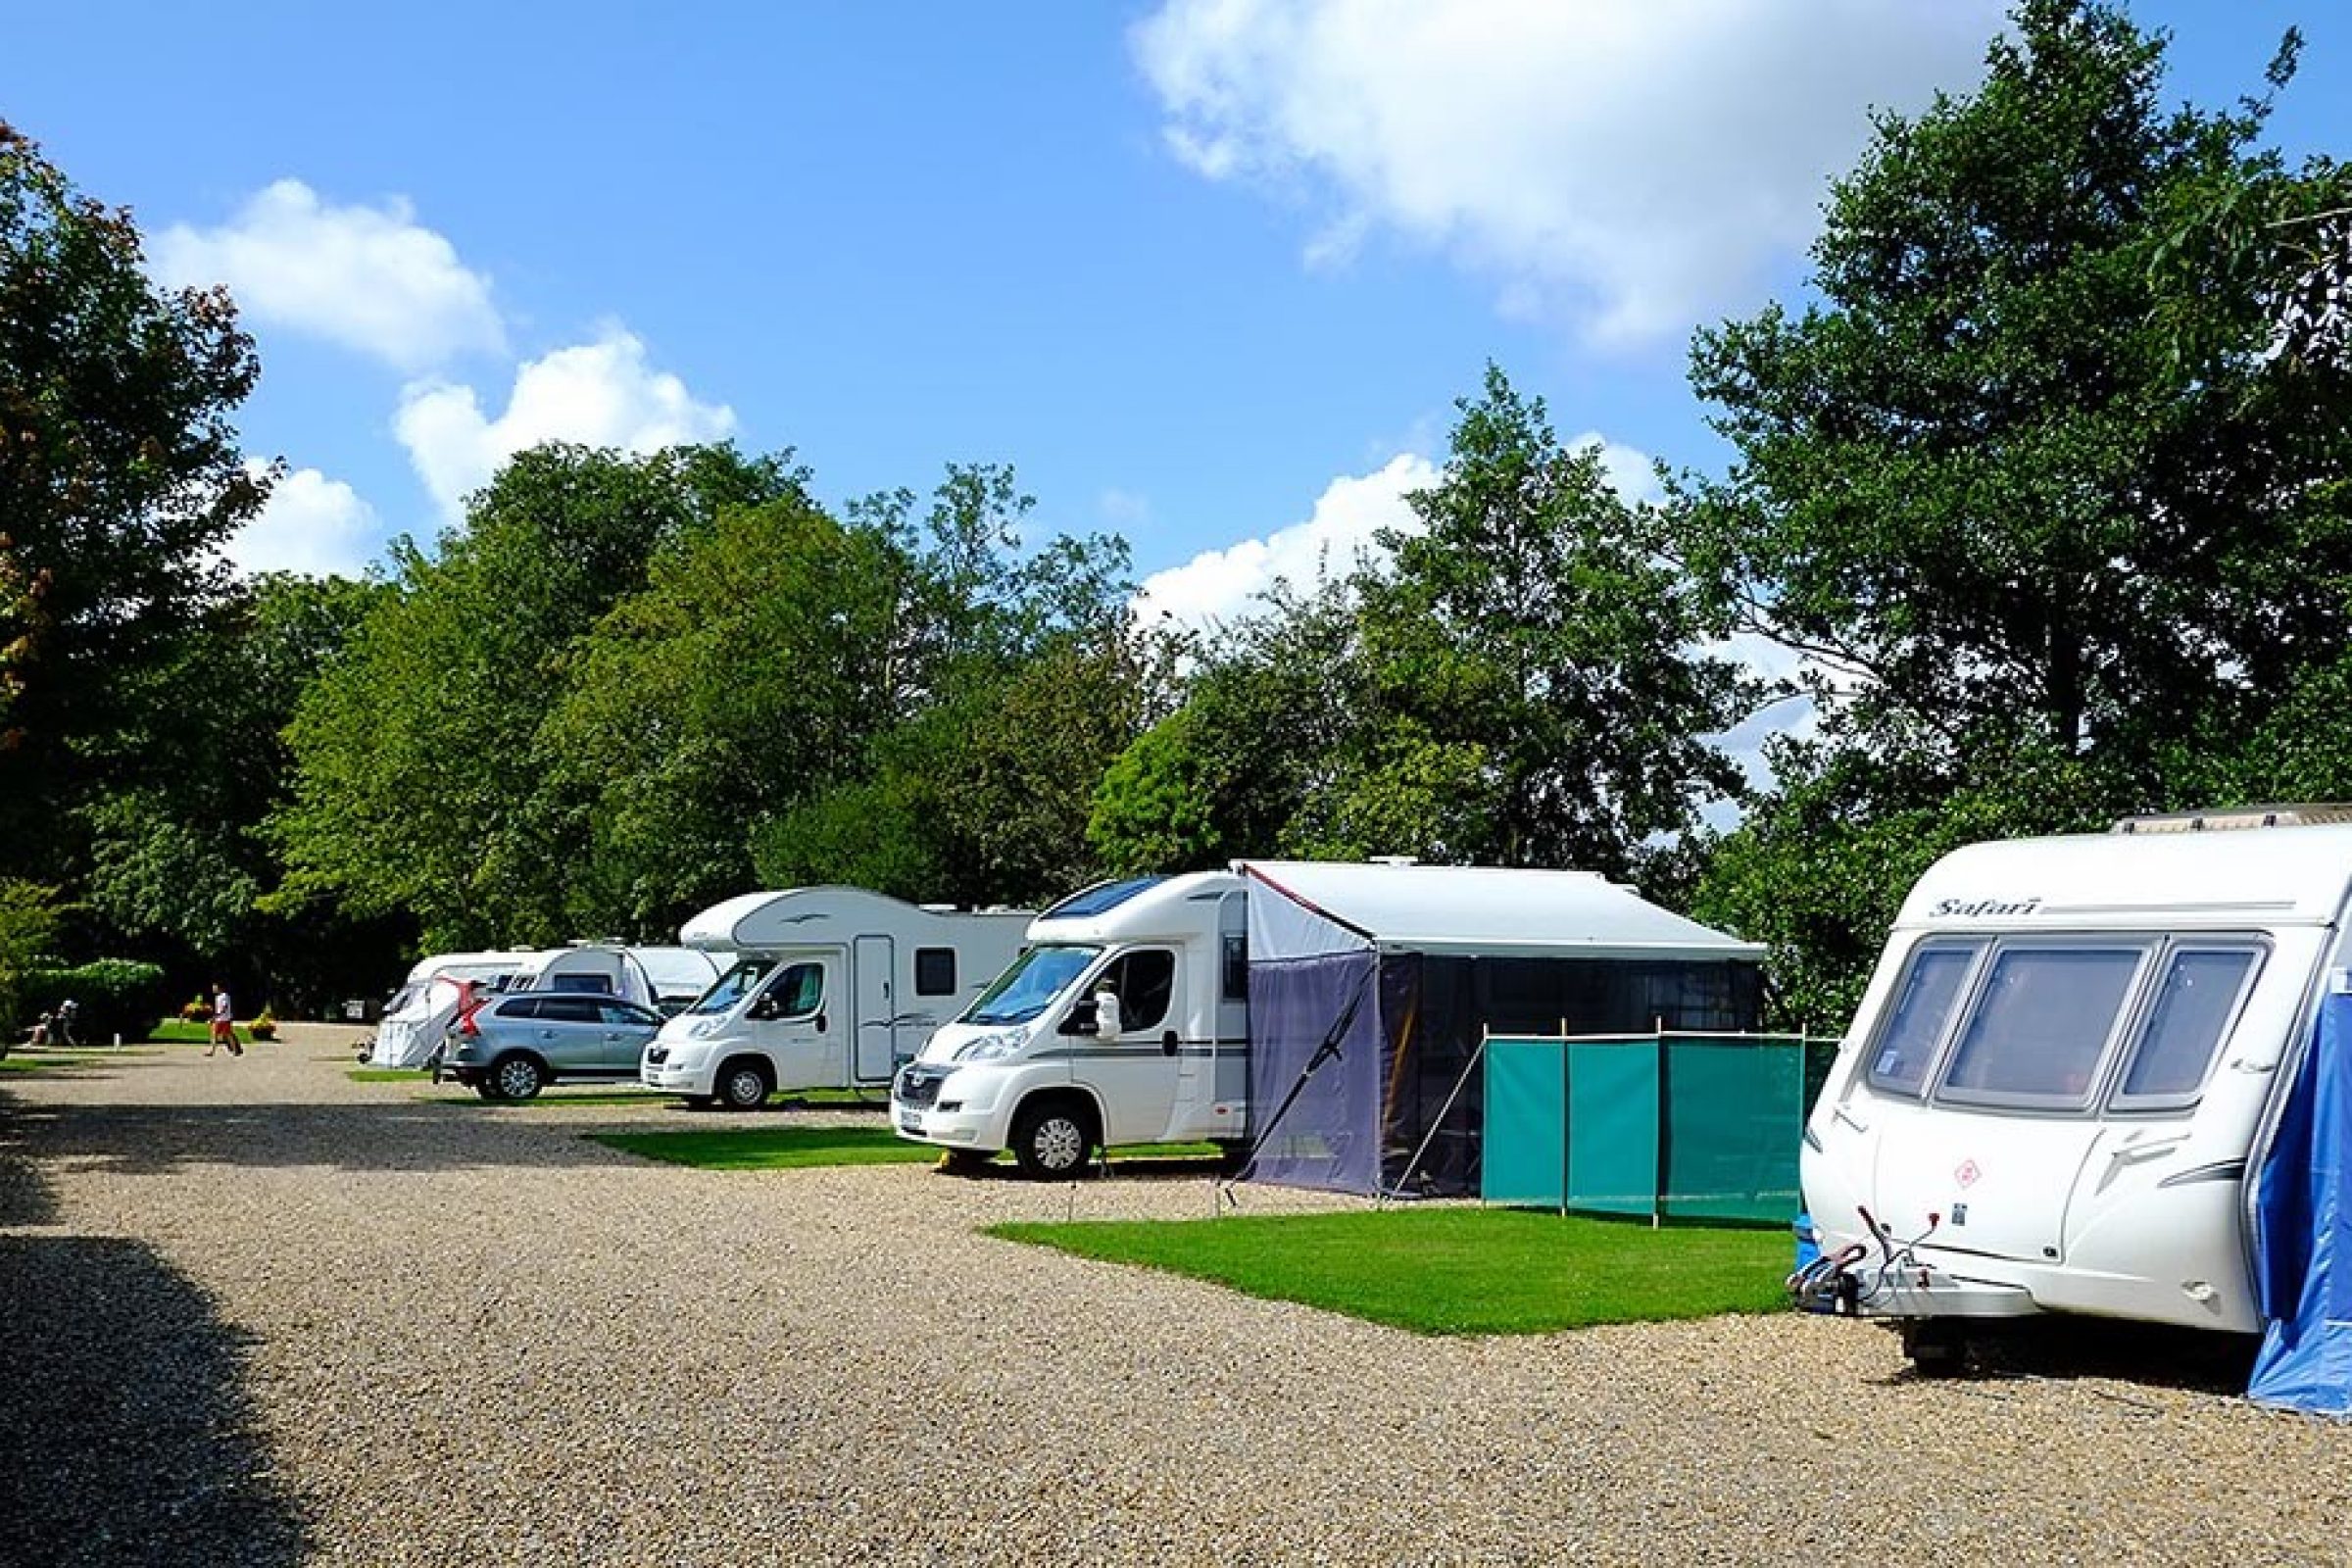 South Lytchett Manor Is The Best Park In The UK For Motorhomes